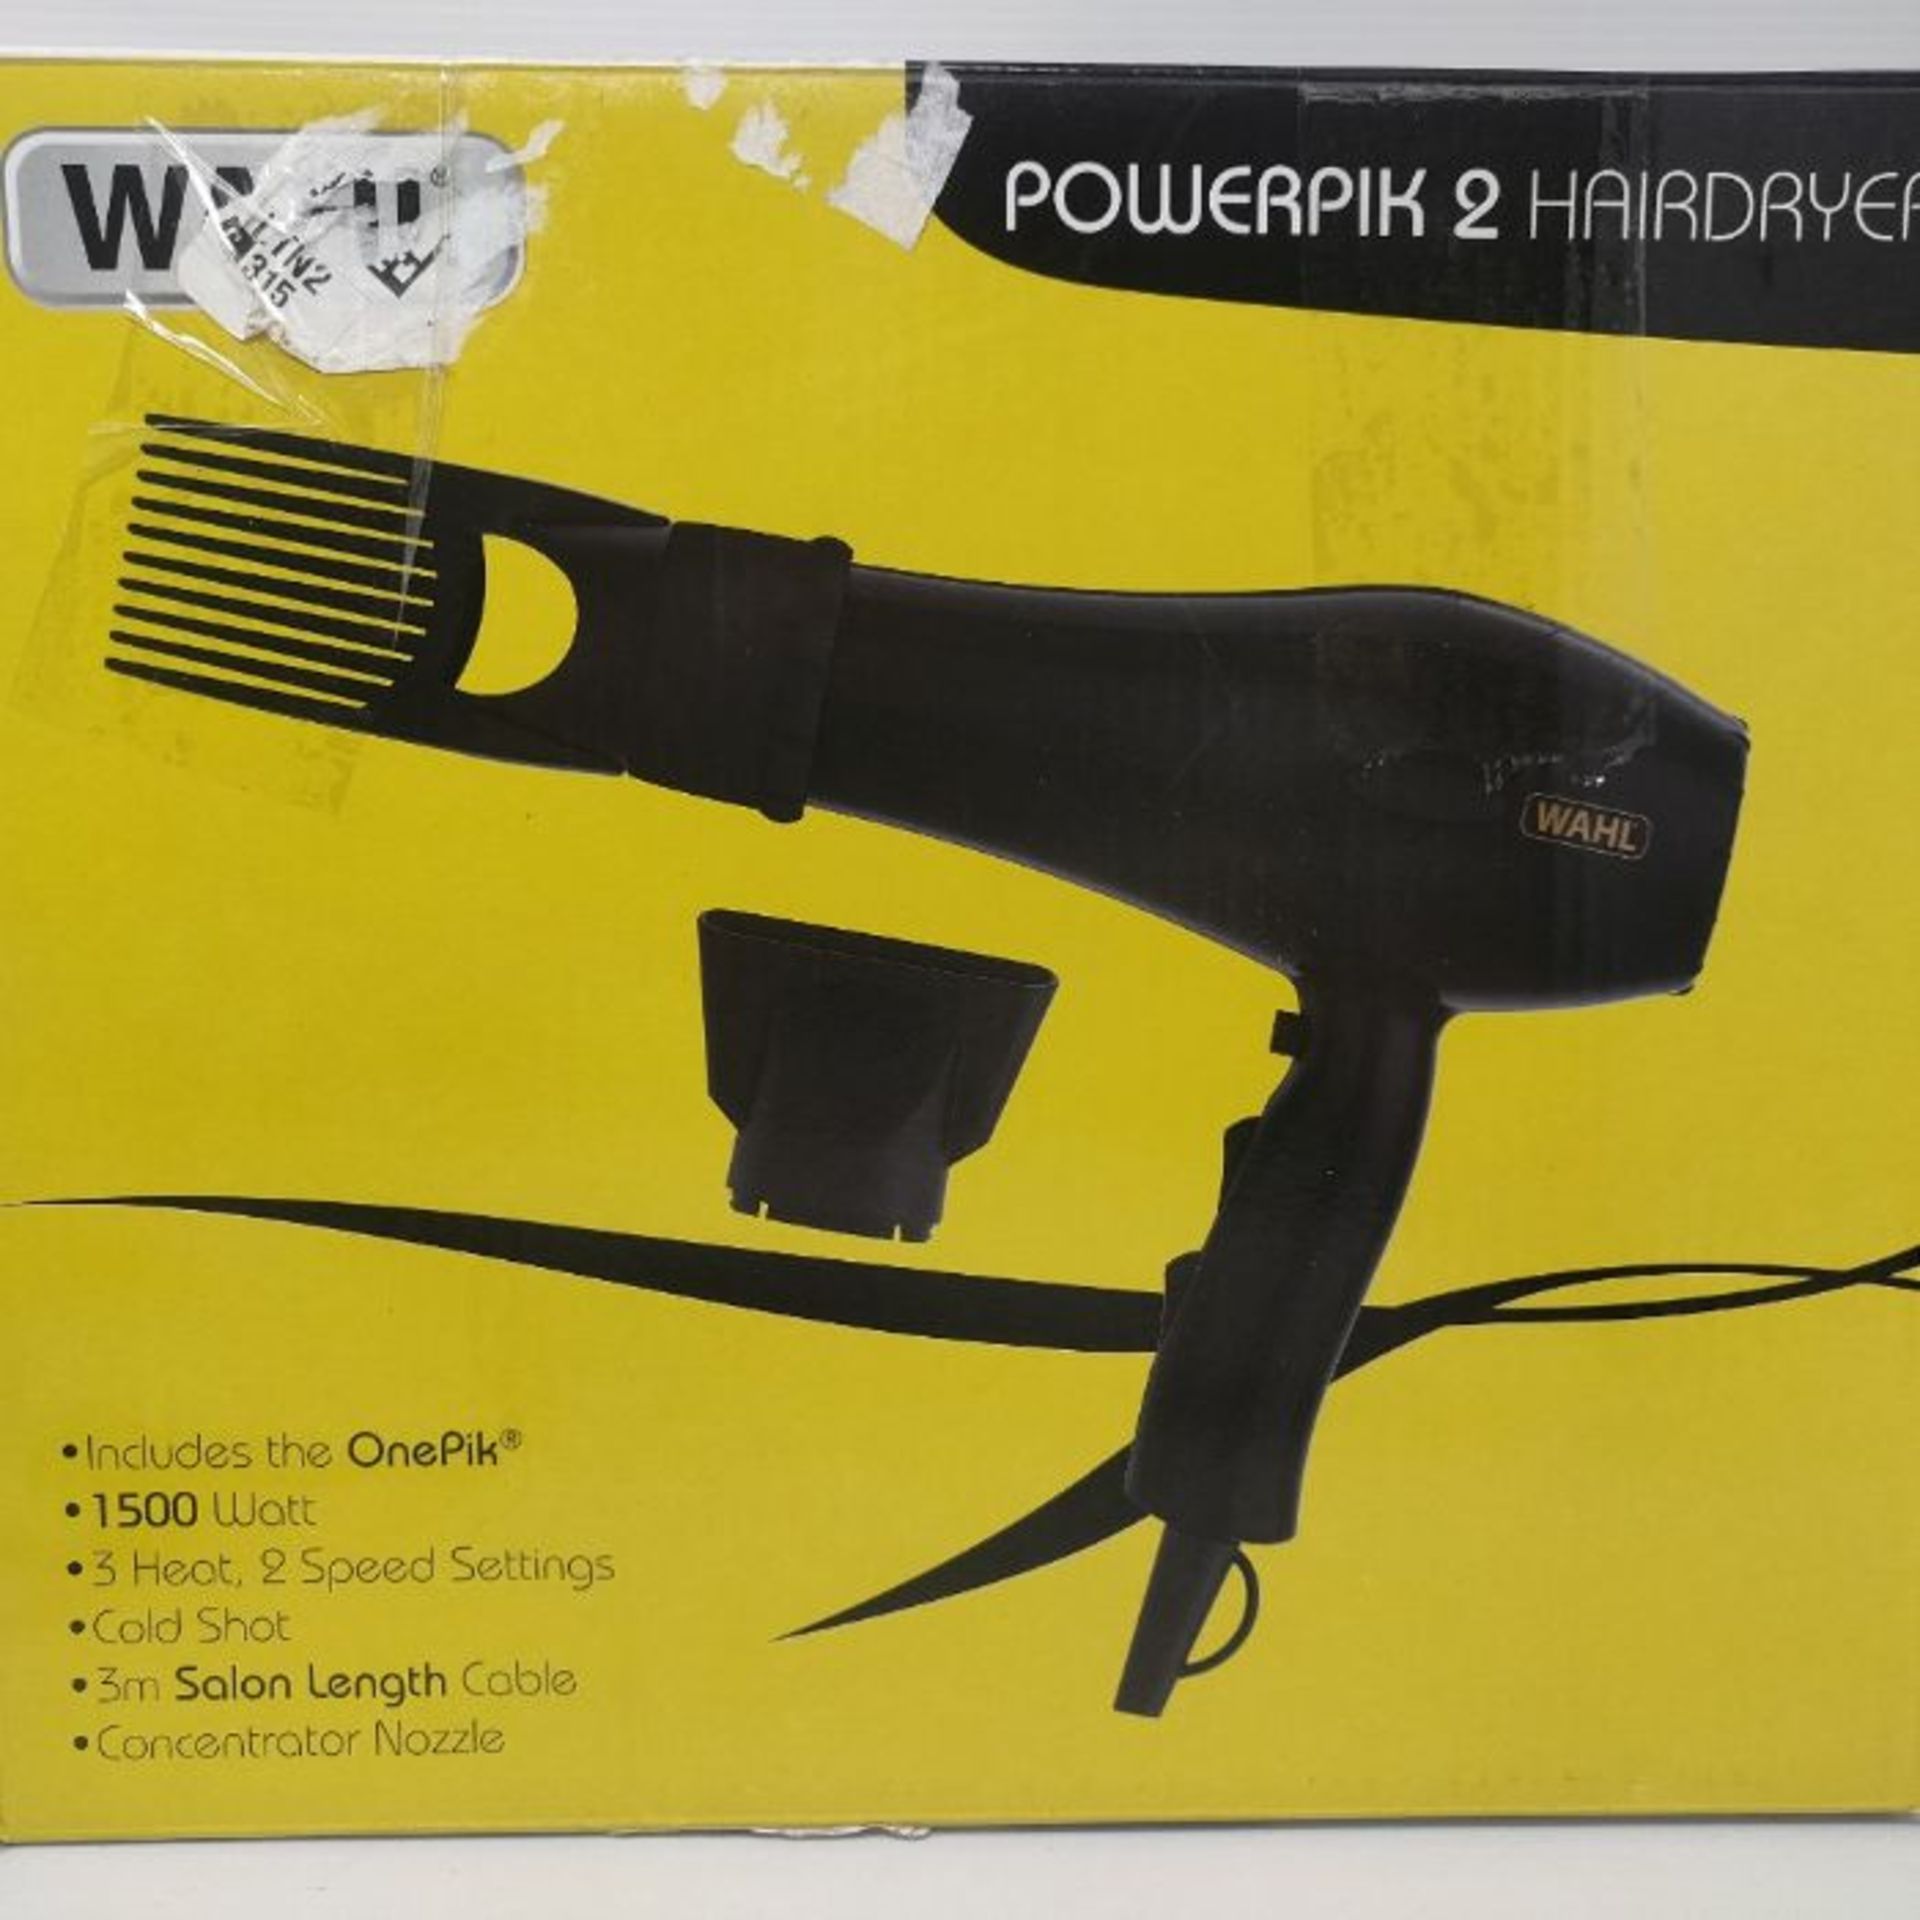 Wahl Hairdryers for Women Powerpik 2 Hair Dryer with Pik Attachment, Afro Hairdryer - Image 3 of 3